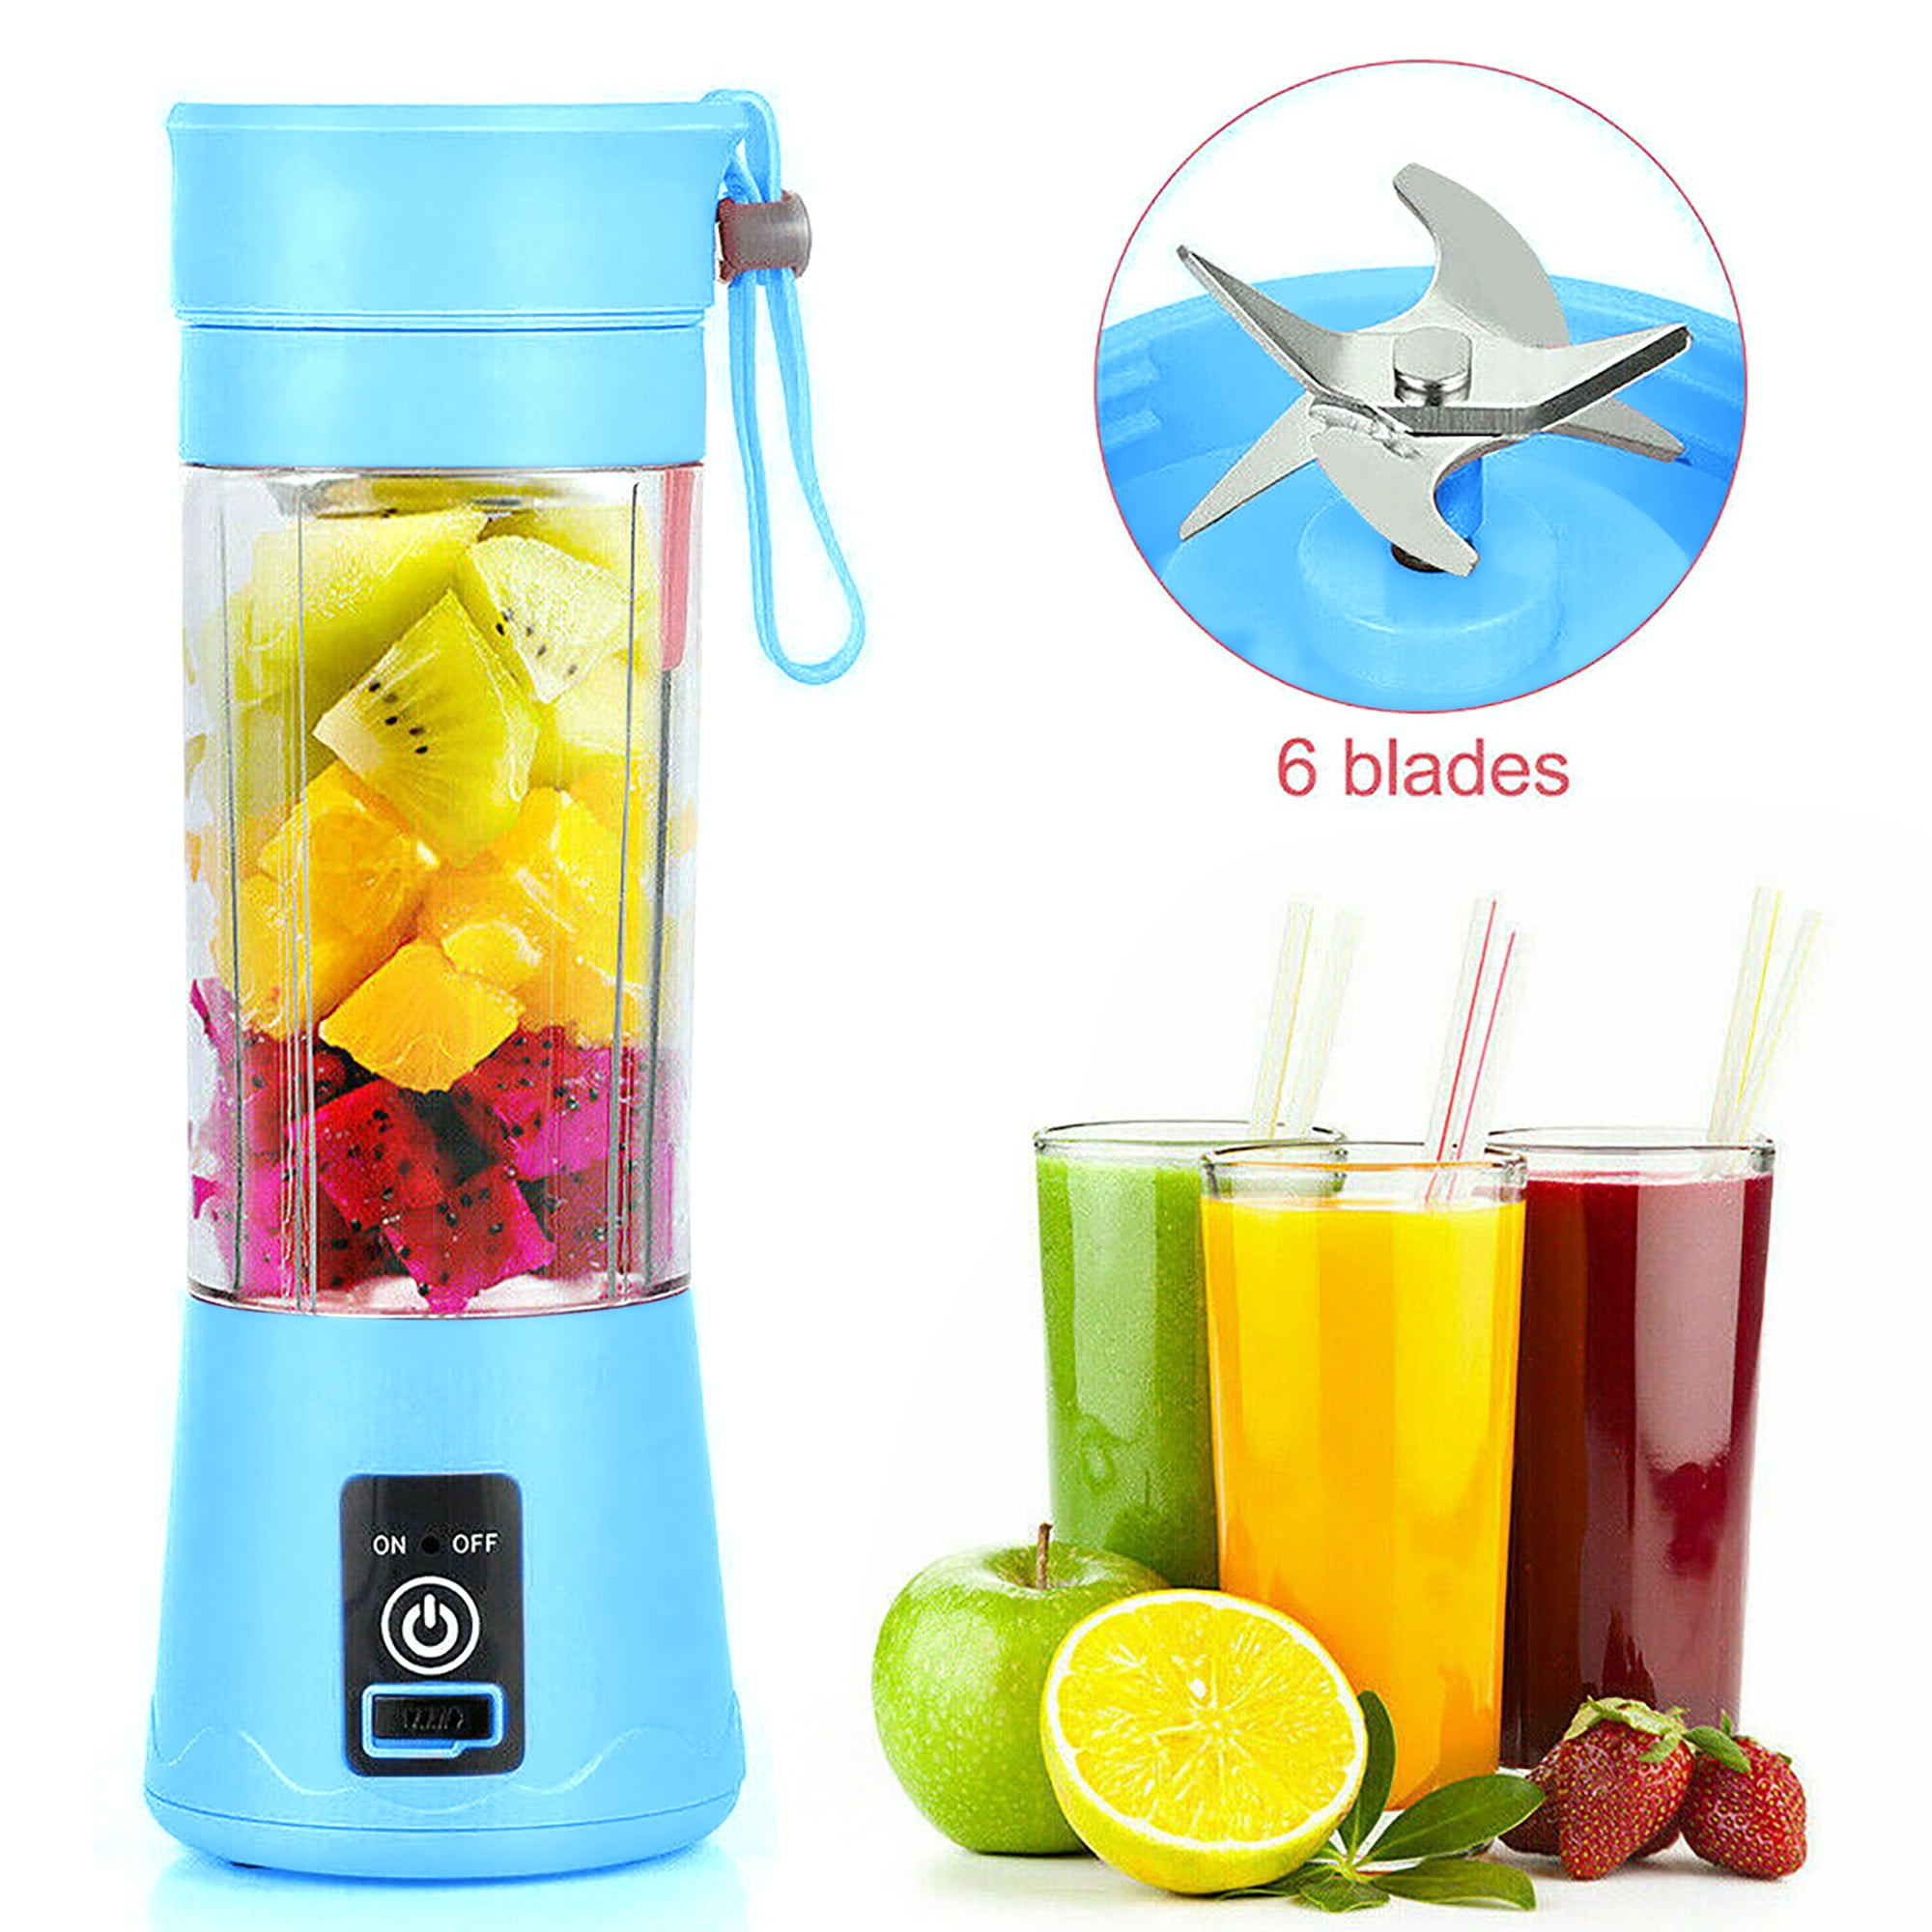  Clearance Portable Blenders for Shakes and Smoothies 400ml  Fruit Juicer USB Rechargeable with 6 Stainless Steel Powerful Durable  Blades Travel Cup and Lid Handheld Blenders for Sports Travel&Outdoors:  Home & Kitchen